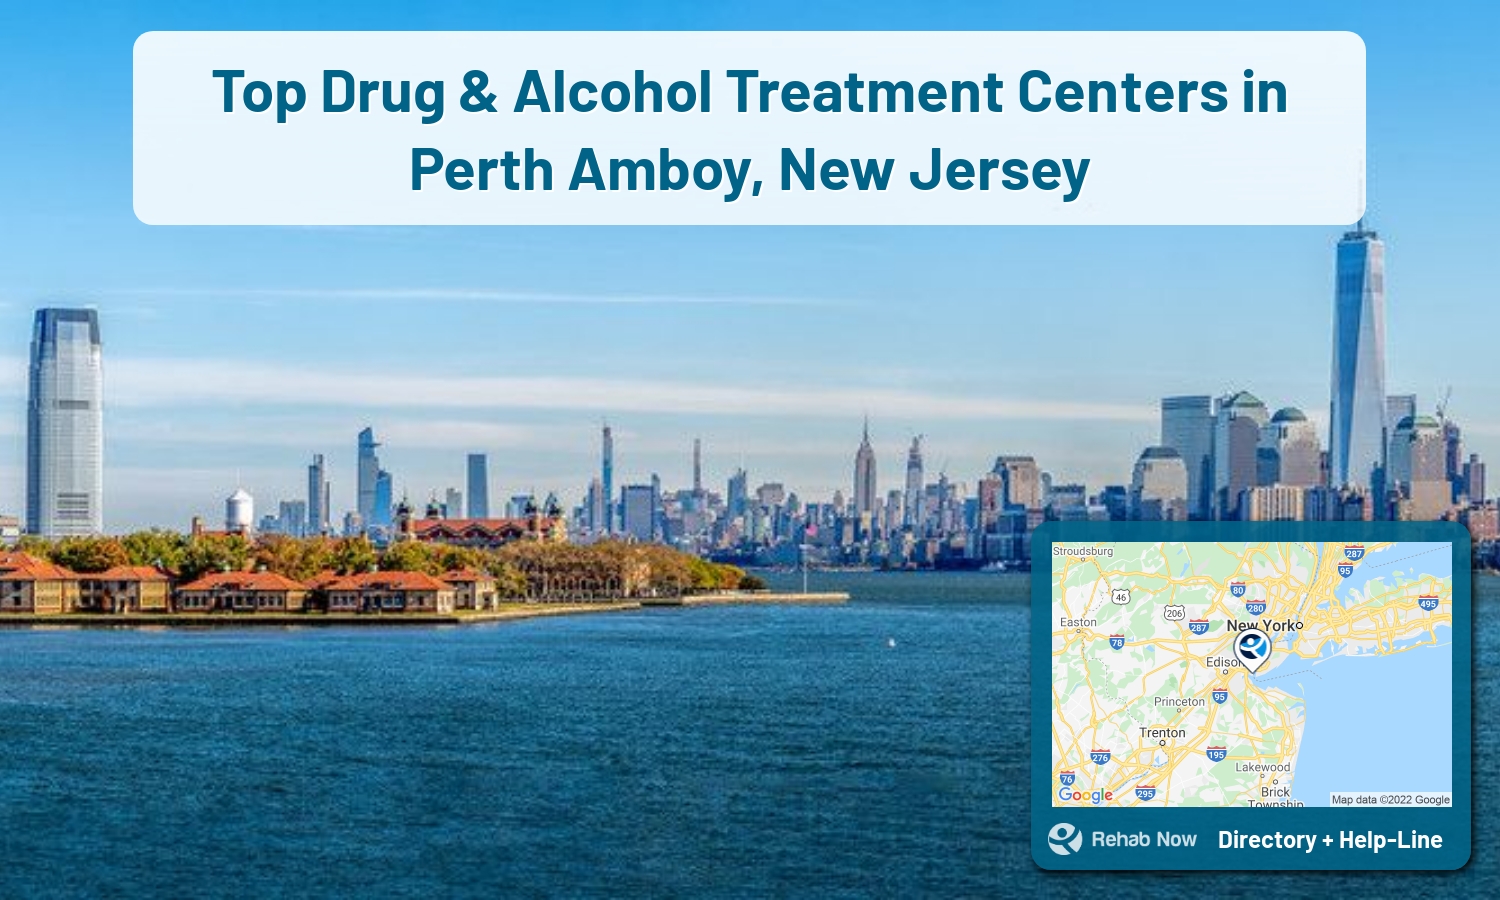 Perth Amboy, NJ Treatment Centers. Find drug rehab in Perth Amboy, New Jersey, or detox and treatment programs. Get the right help now!